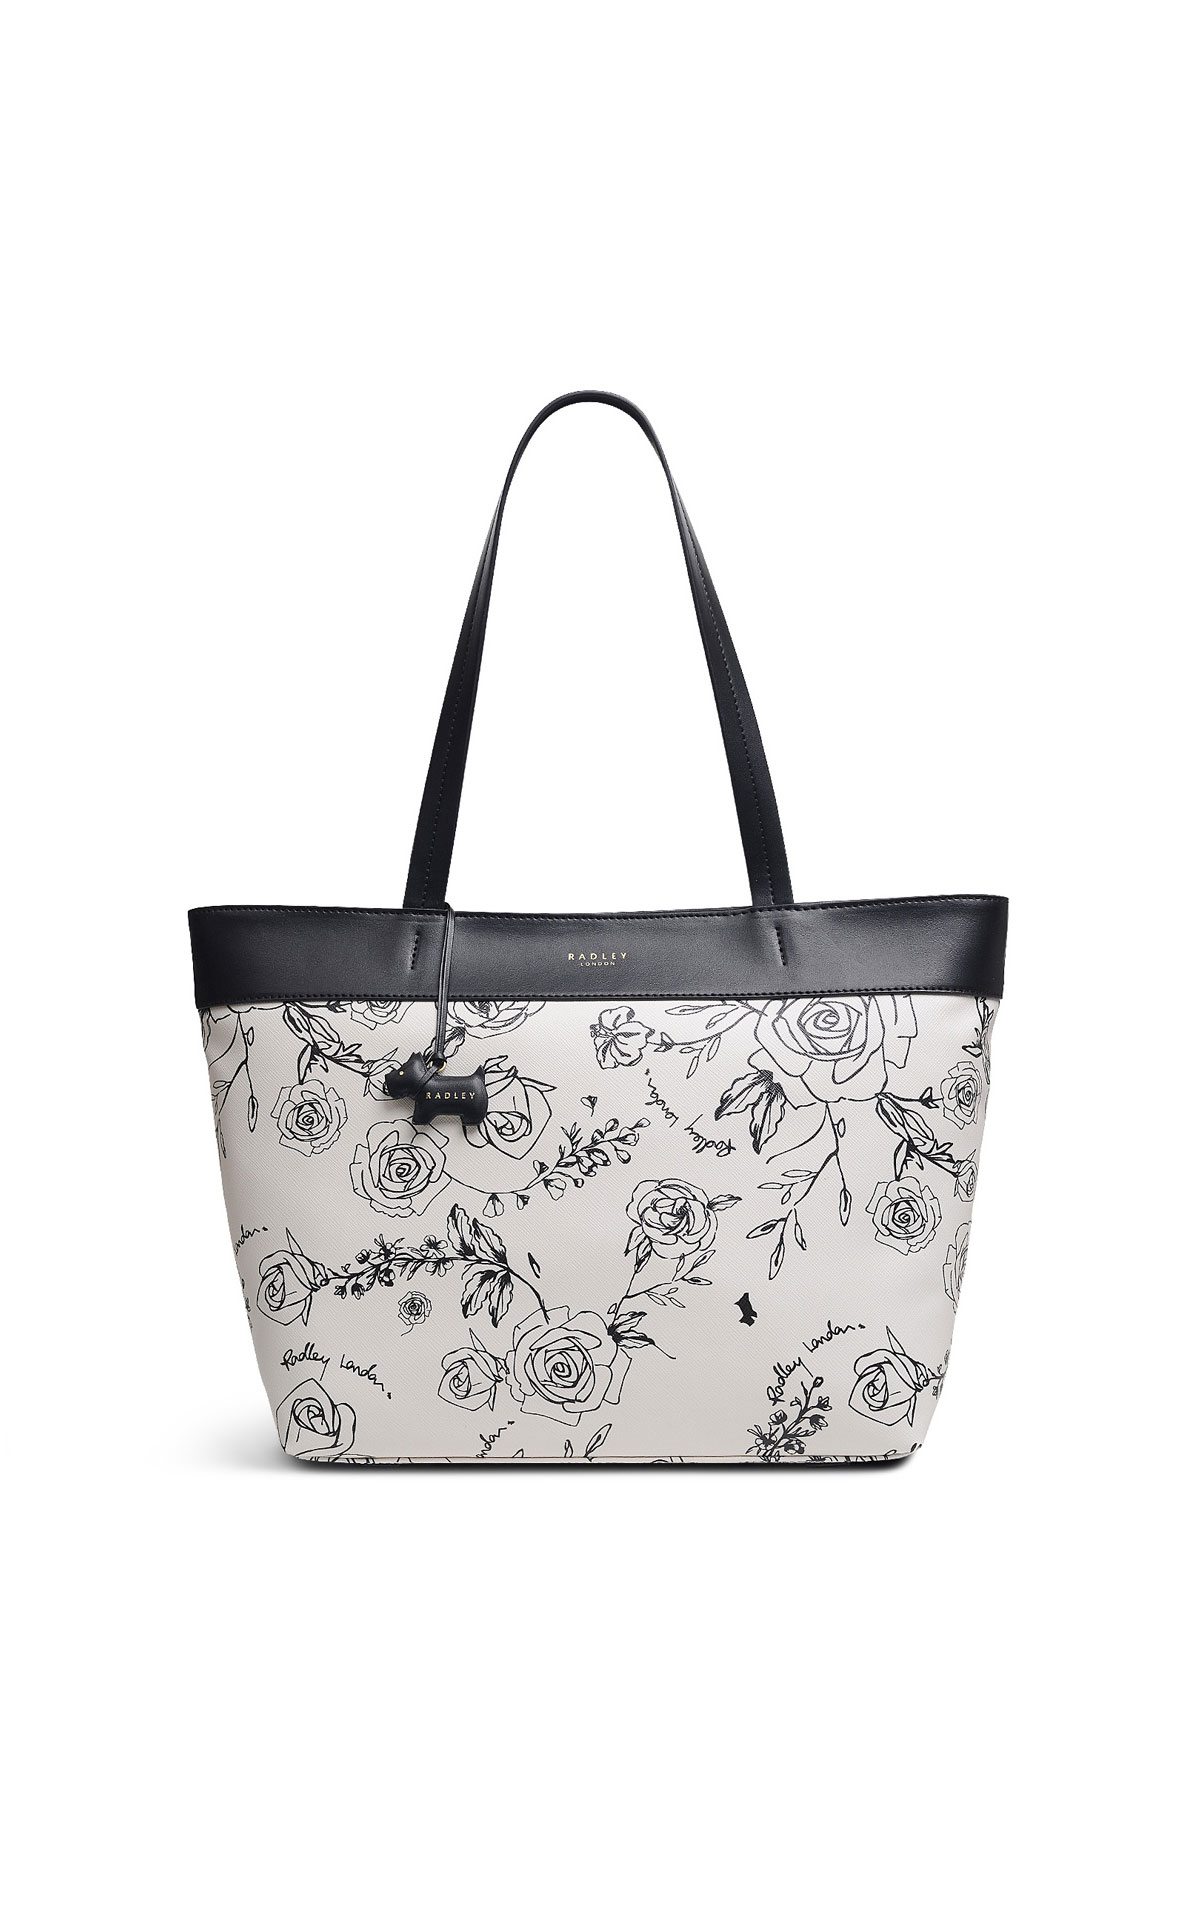 Radley Rosey posey large ziptote tote  from Bicester Village